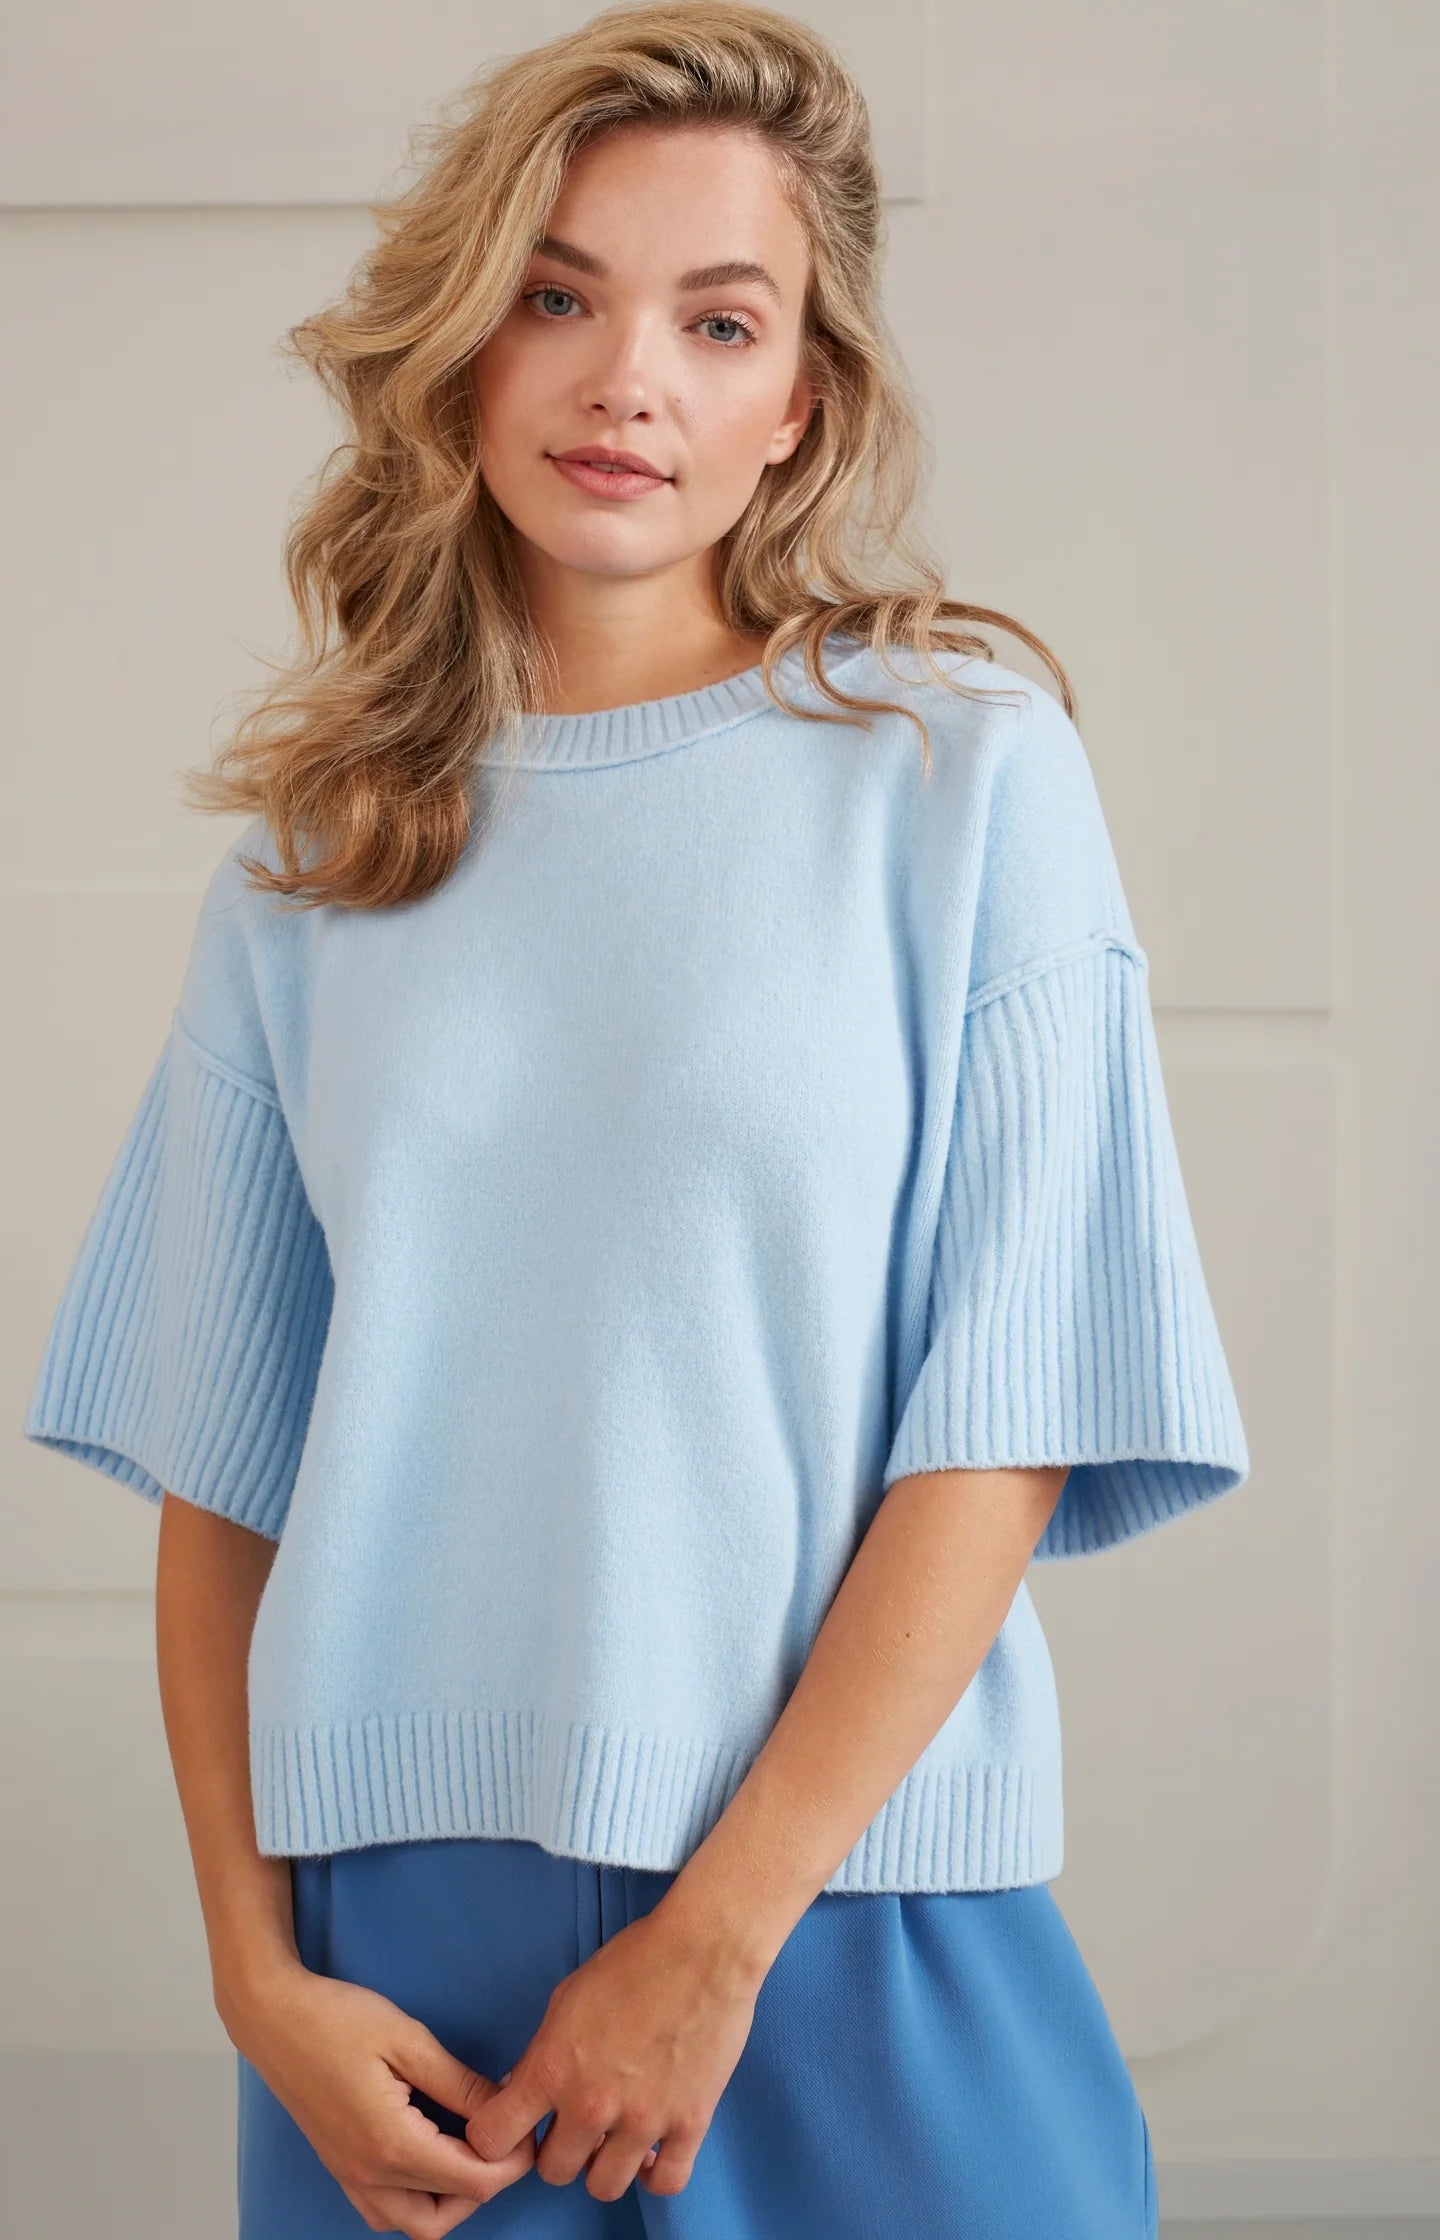 Yaya Sweater with boatneck, wide half long sleeves in boxy fit Blue